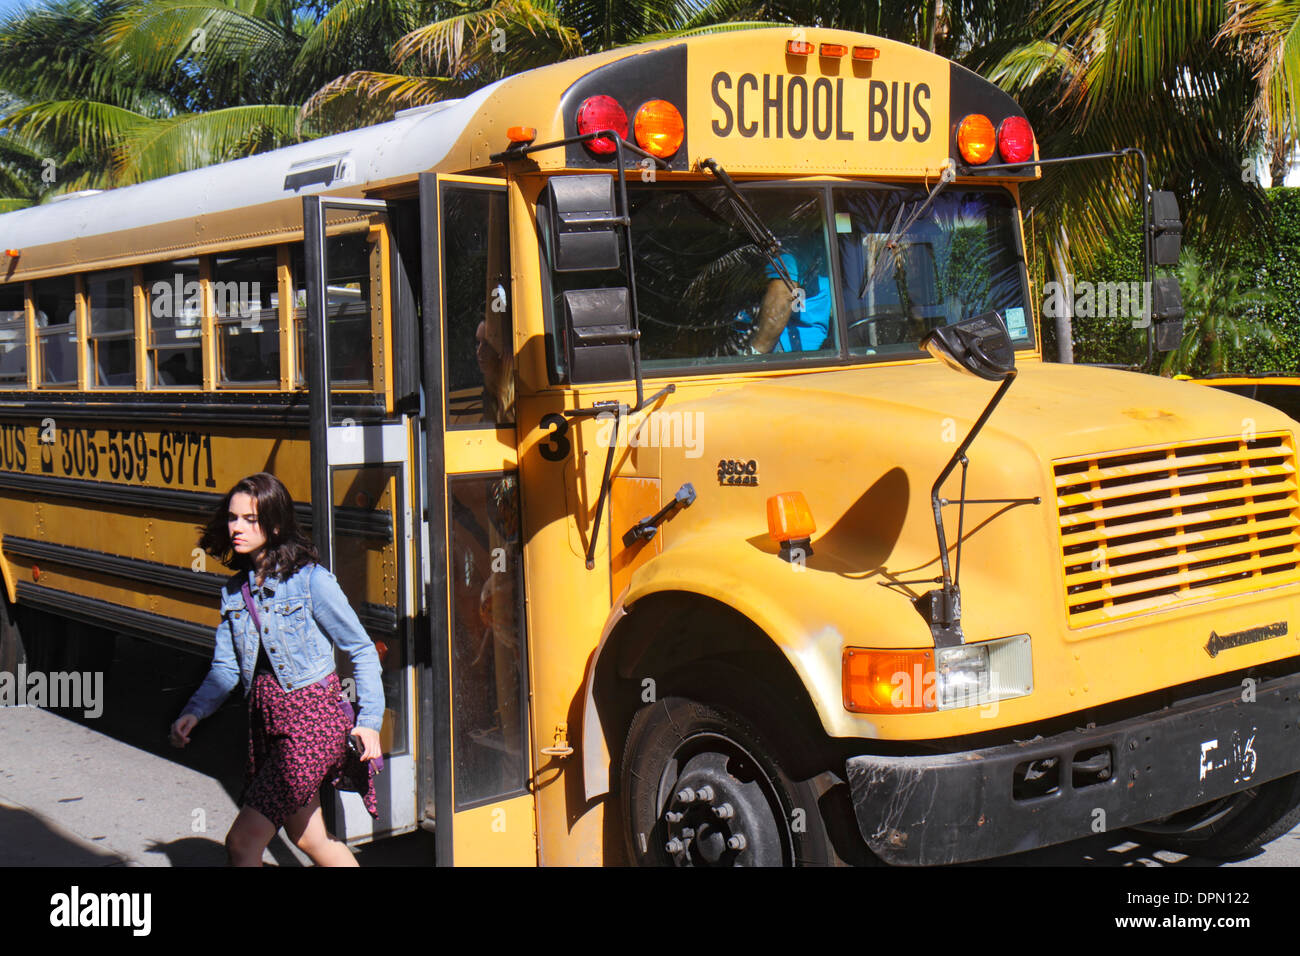 Miami Beach Florida,school bus,coach,girl girls,youngster,female kids children student students getting off,FL131231137 Stock Photo